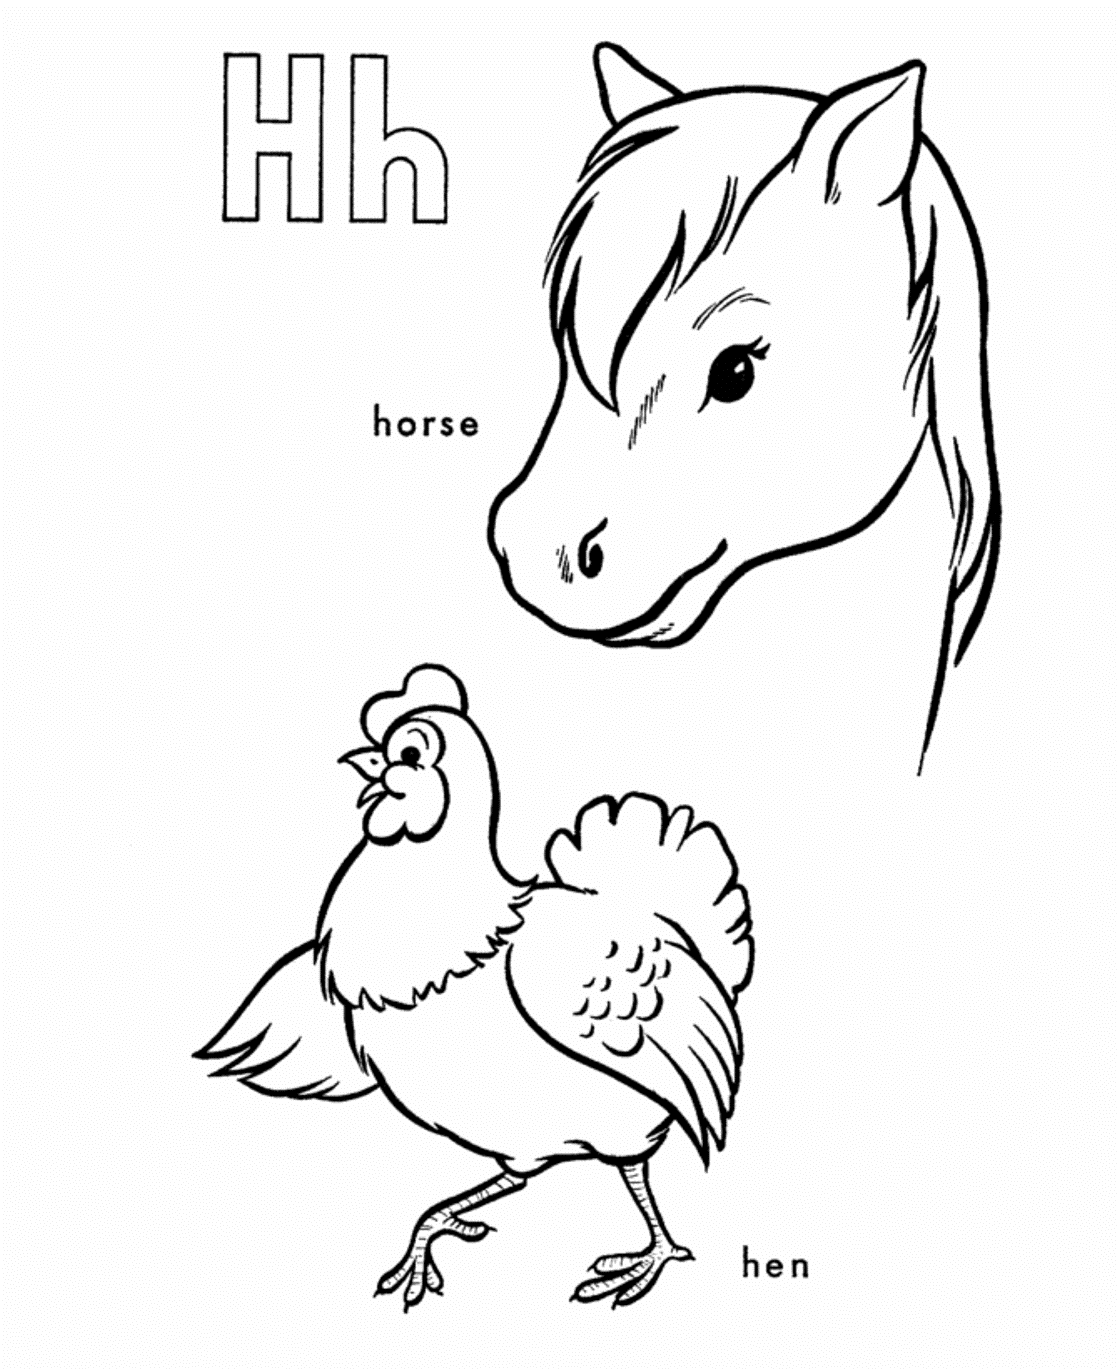 Horse And Hen Alphabet S Printable9249 Coloring Page